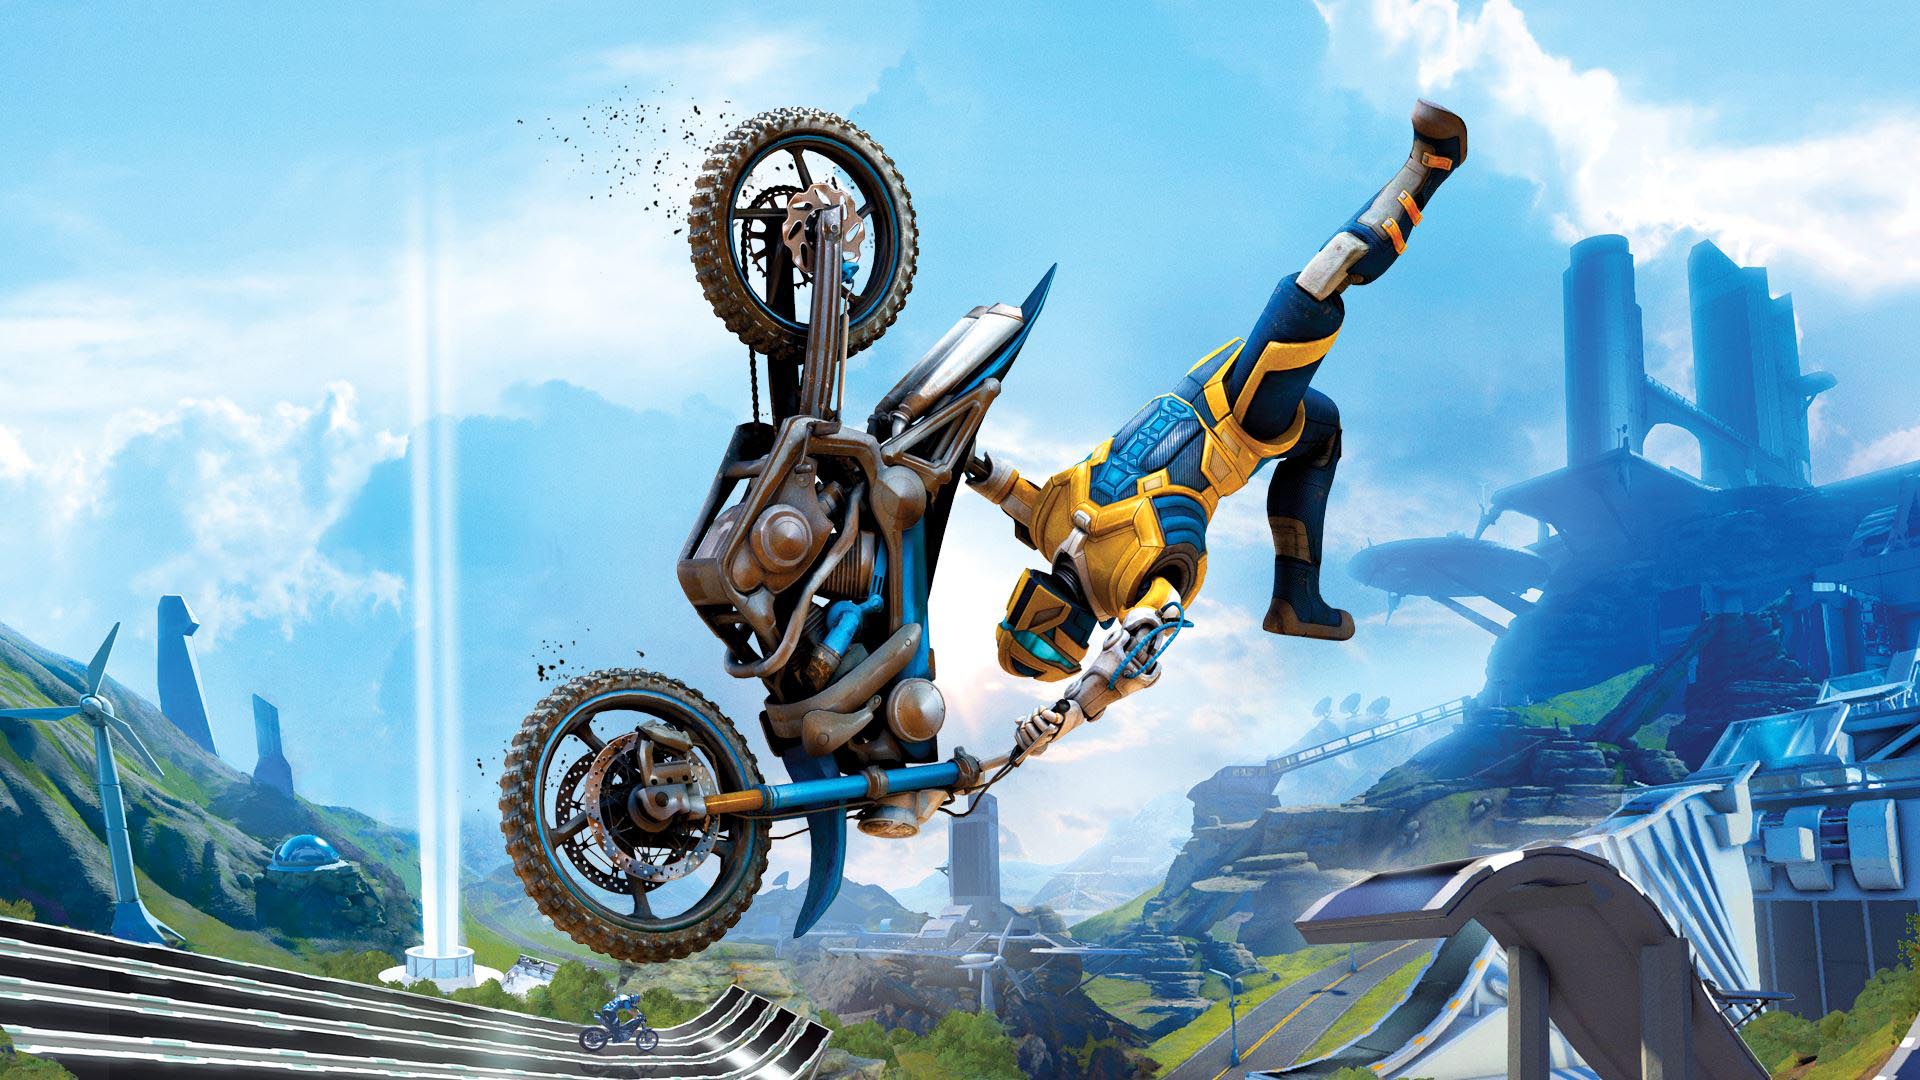 Okay, so there’s a finish line here. But the focus in <i>Trials Fusion</i> isn’t getting there first, it’s pulling stunts along the way and getting there in style. For current-gen gamers, this is a no-brainer, as it’s one of the few games which support four-player local multiplayer. Oh, did we mention the unicorn DLC? Yep, that’s a thing. | <b>For:</b> PC, PS4, Xbox One, Xbox 360